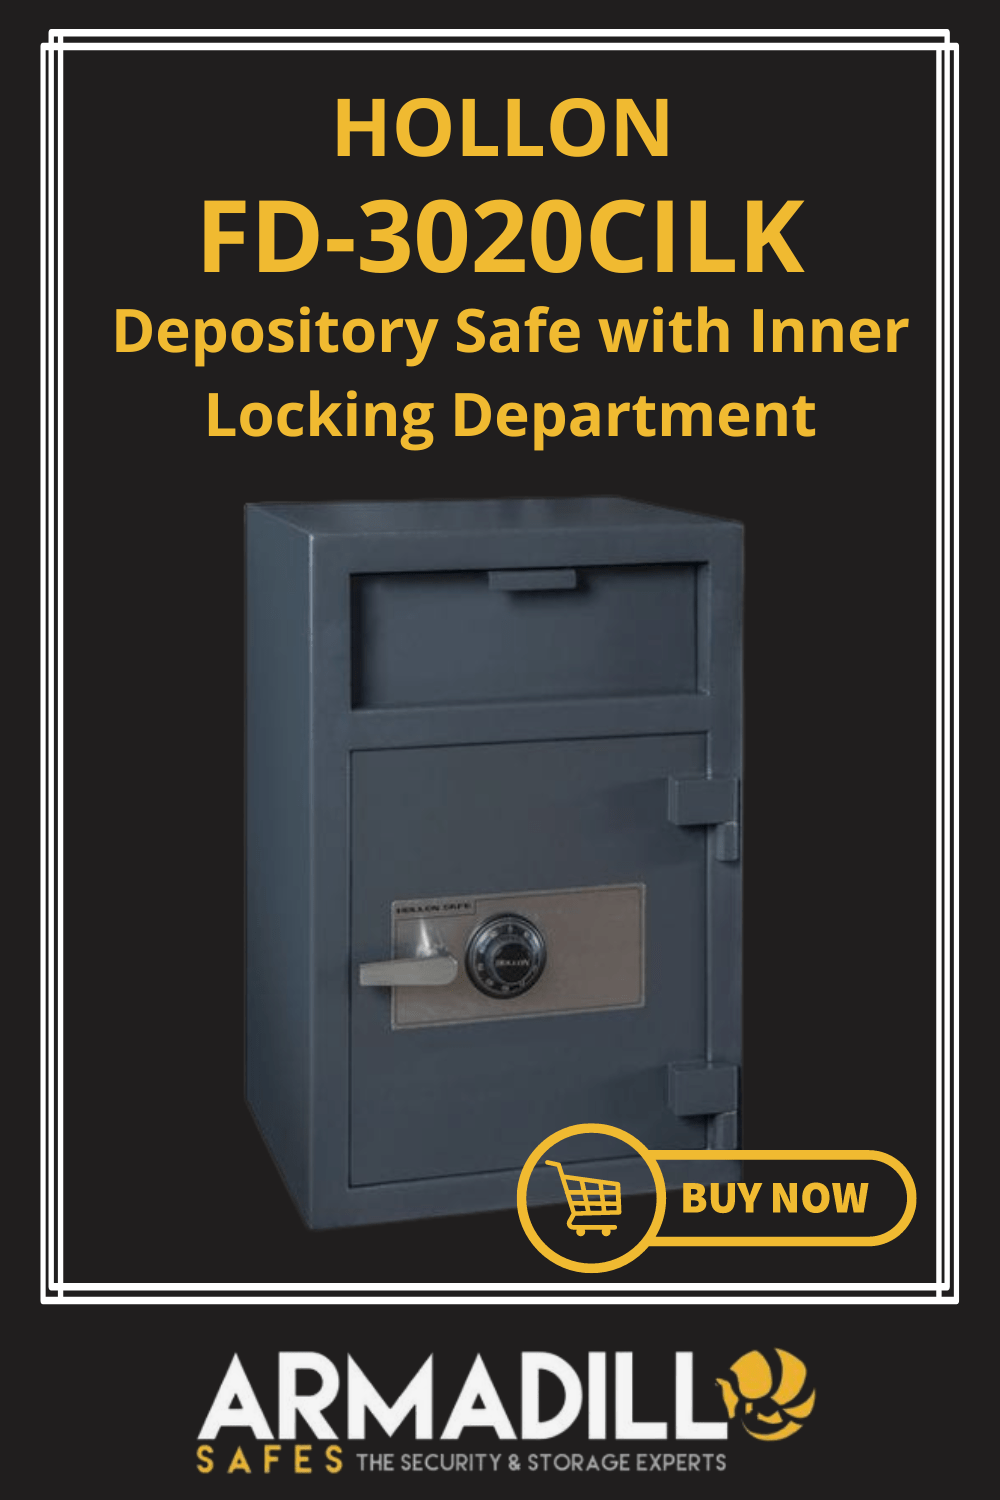 Hollon FD-3020CILK Depository Safe with Inner Locking Department Armadillo Safe and Vault